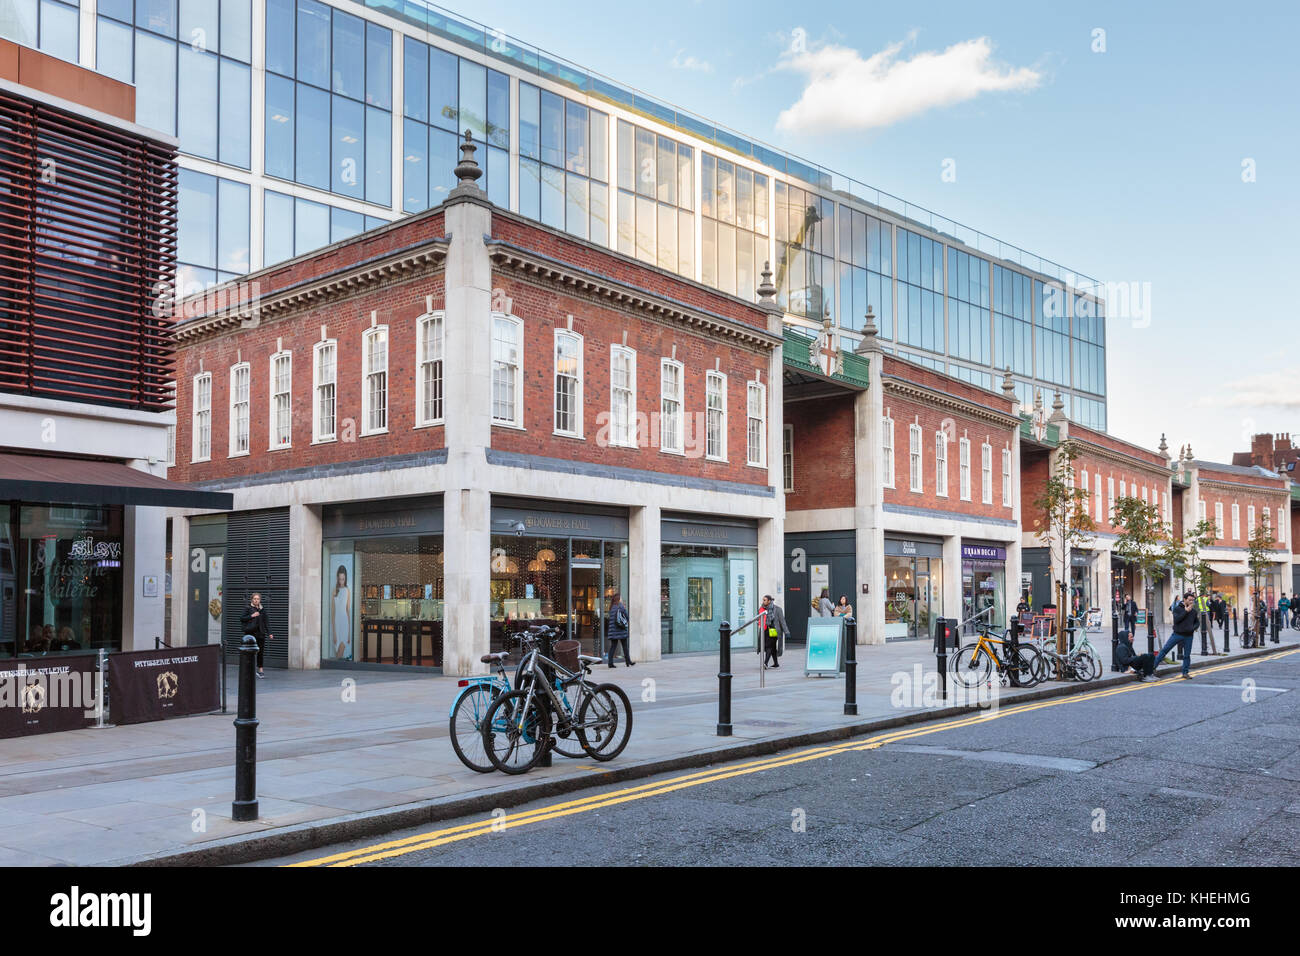 South side exterior of the historic Spitalfields market, Brushfield Street in the East End of London, UK Stock Photo